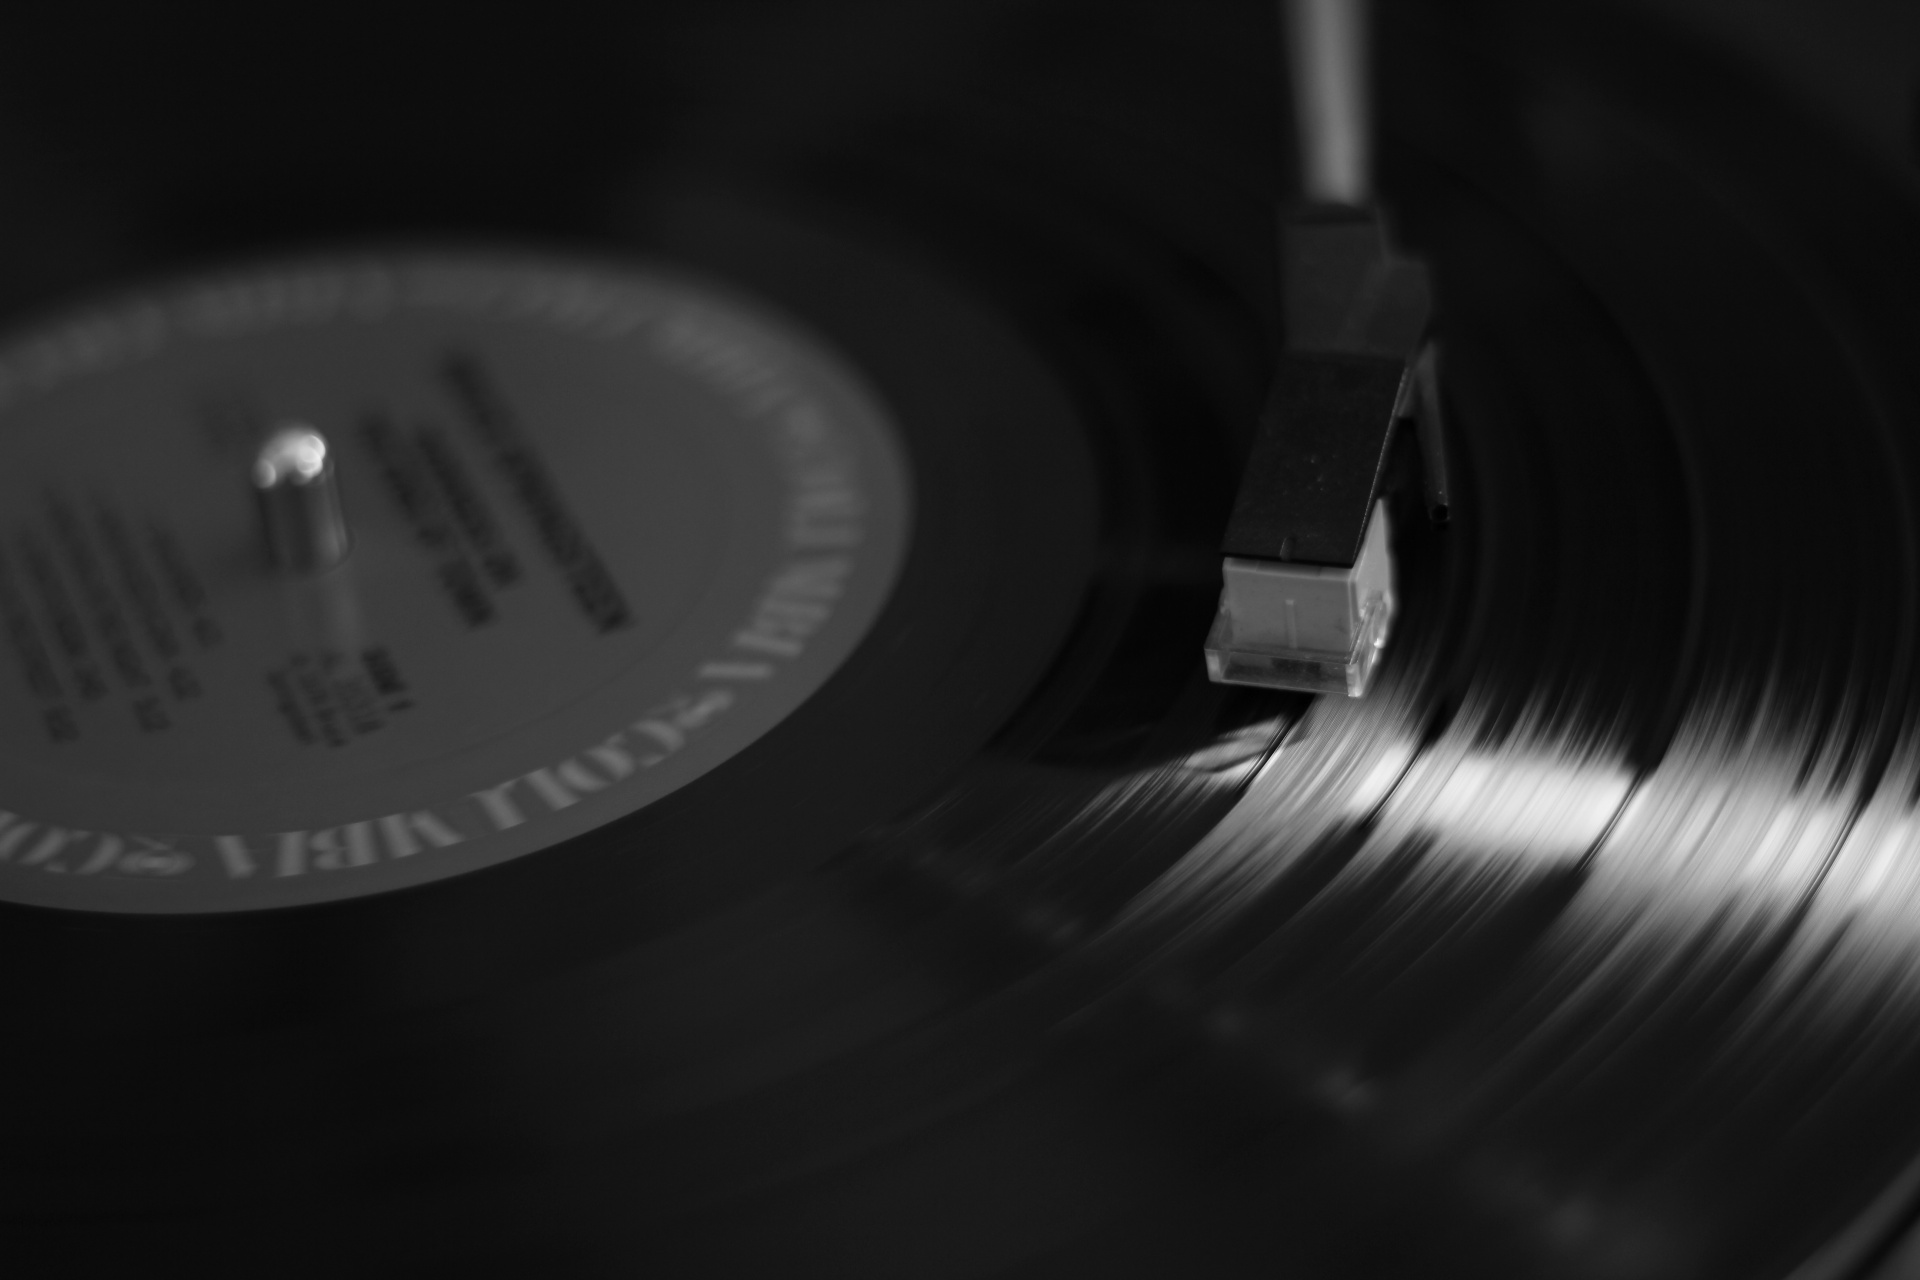 Wallpaper, Background, Image, Painted Paper, Tapestry, black and white Picture Frame, Turntable, ancient, Play the Music